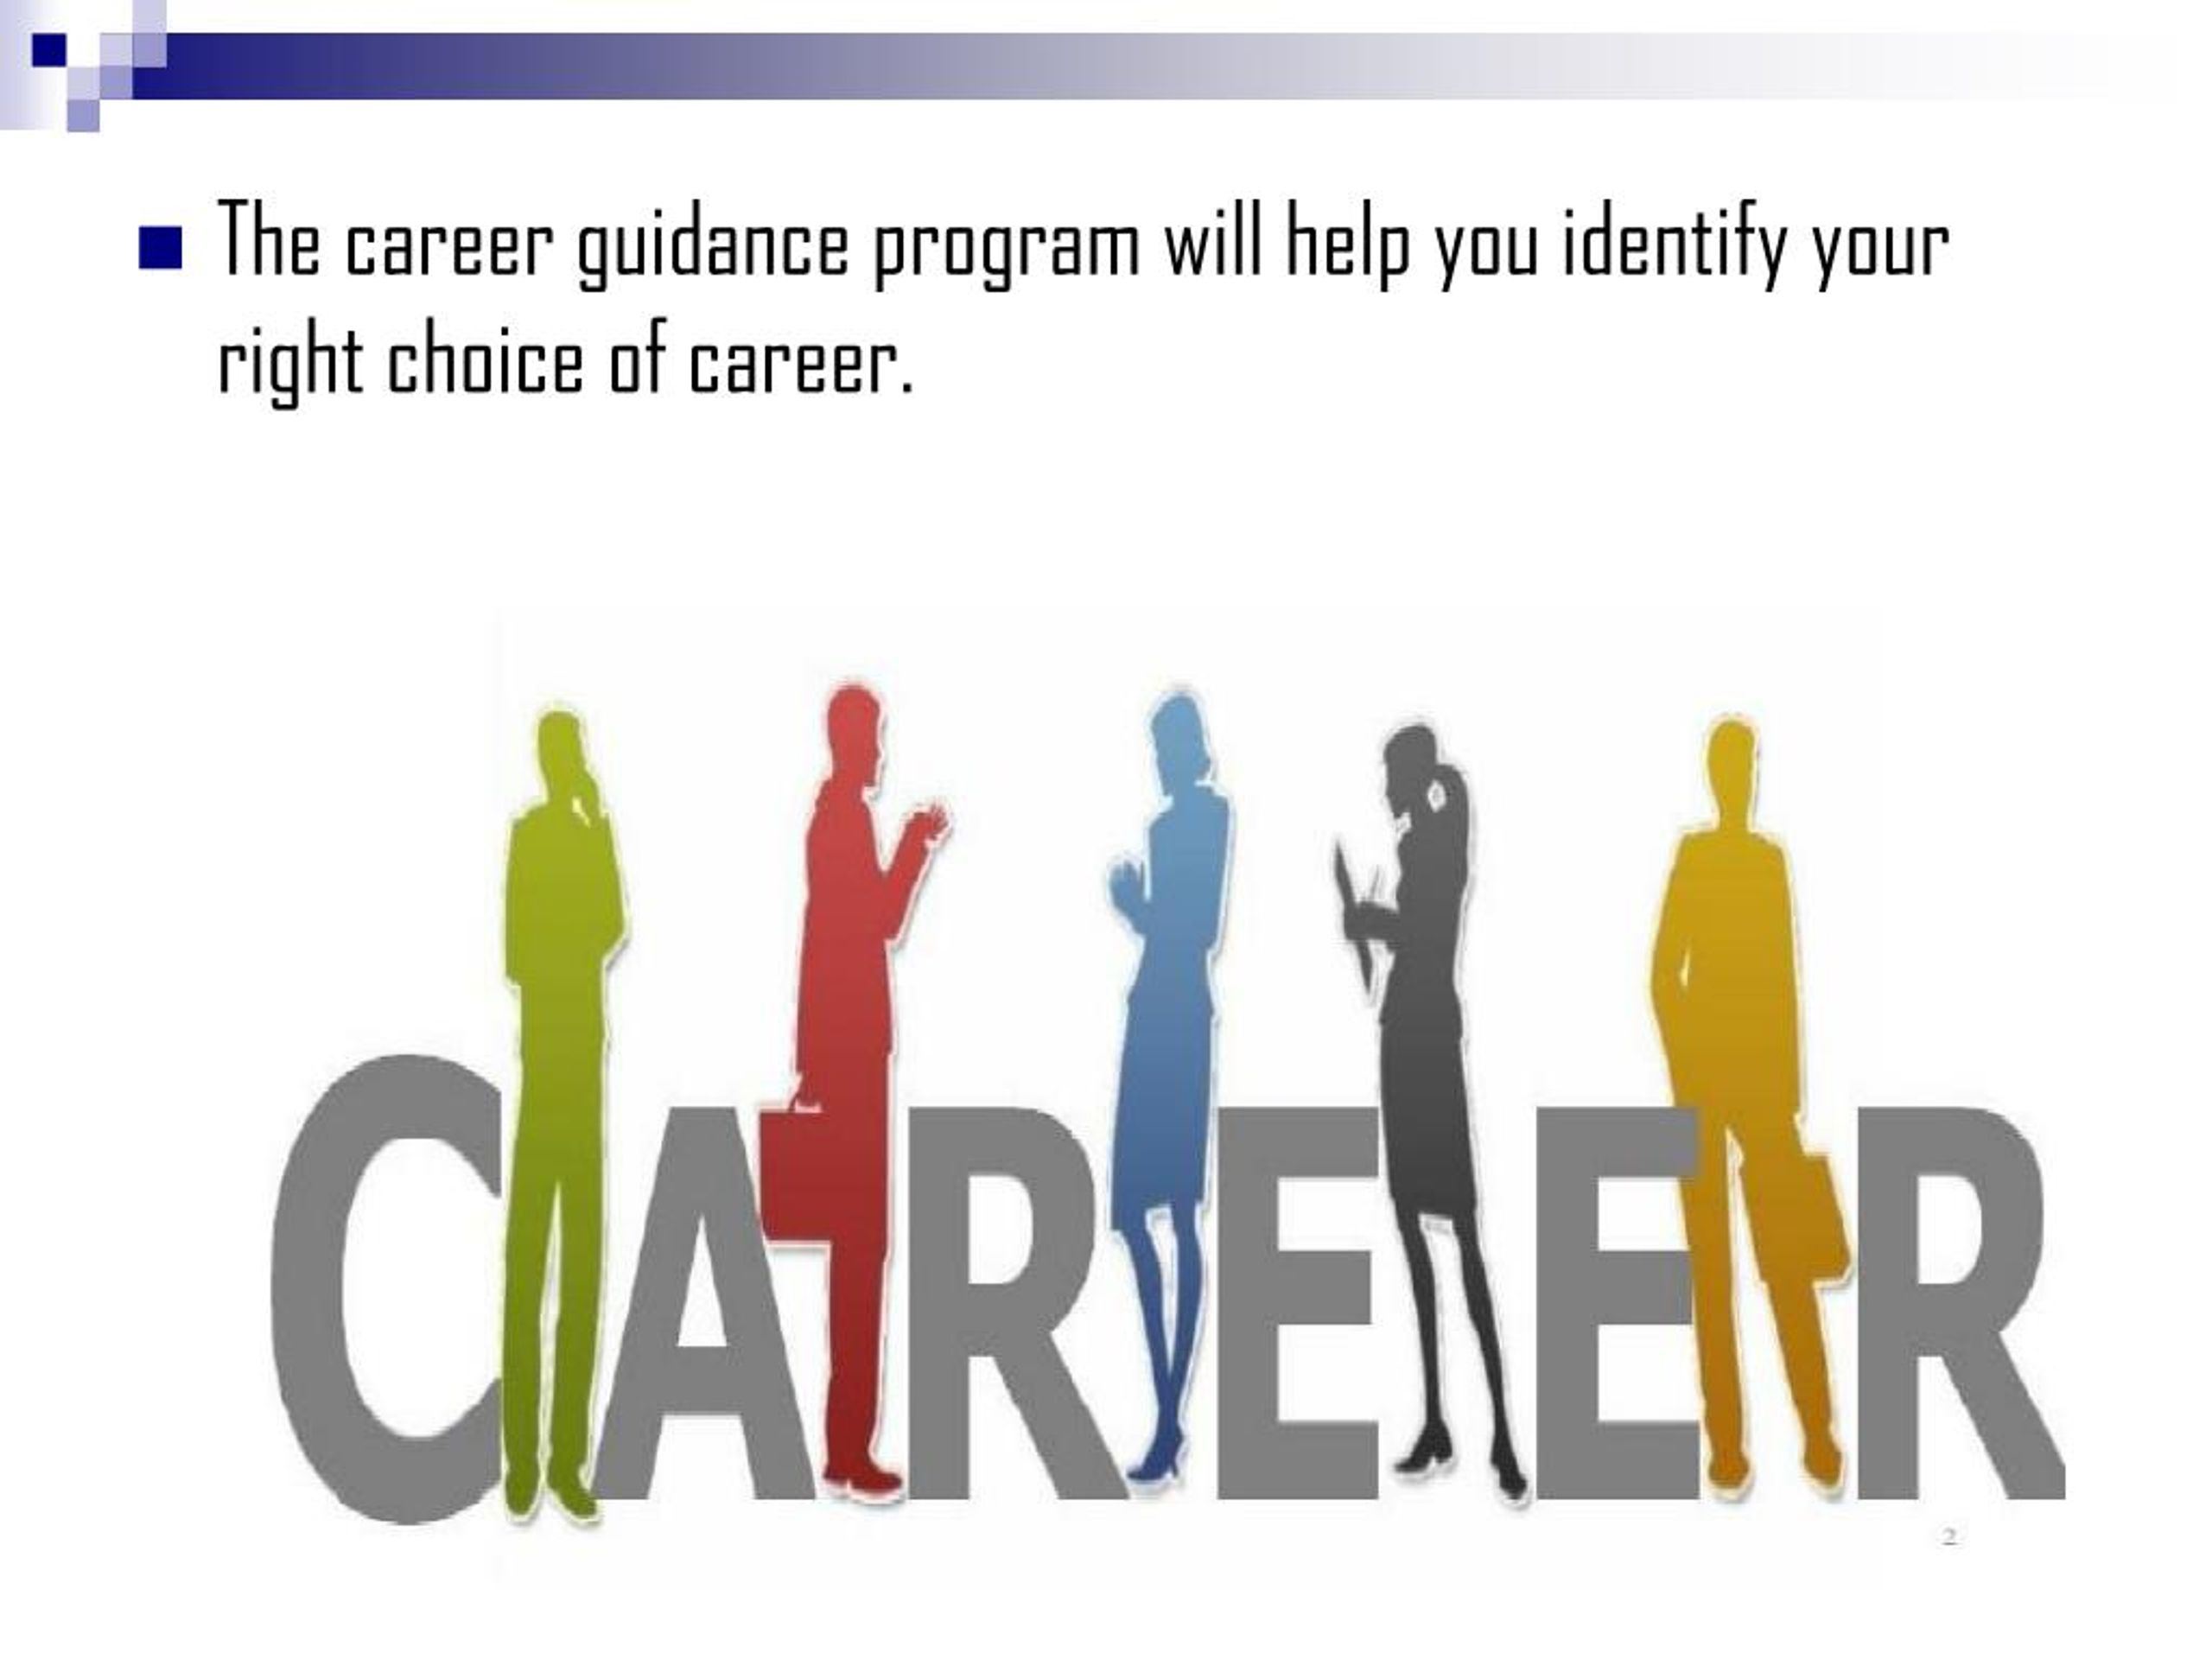 powerpoint presentation about career guidance